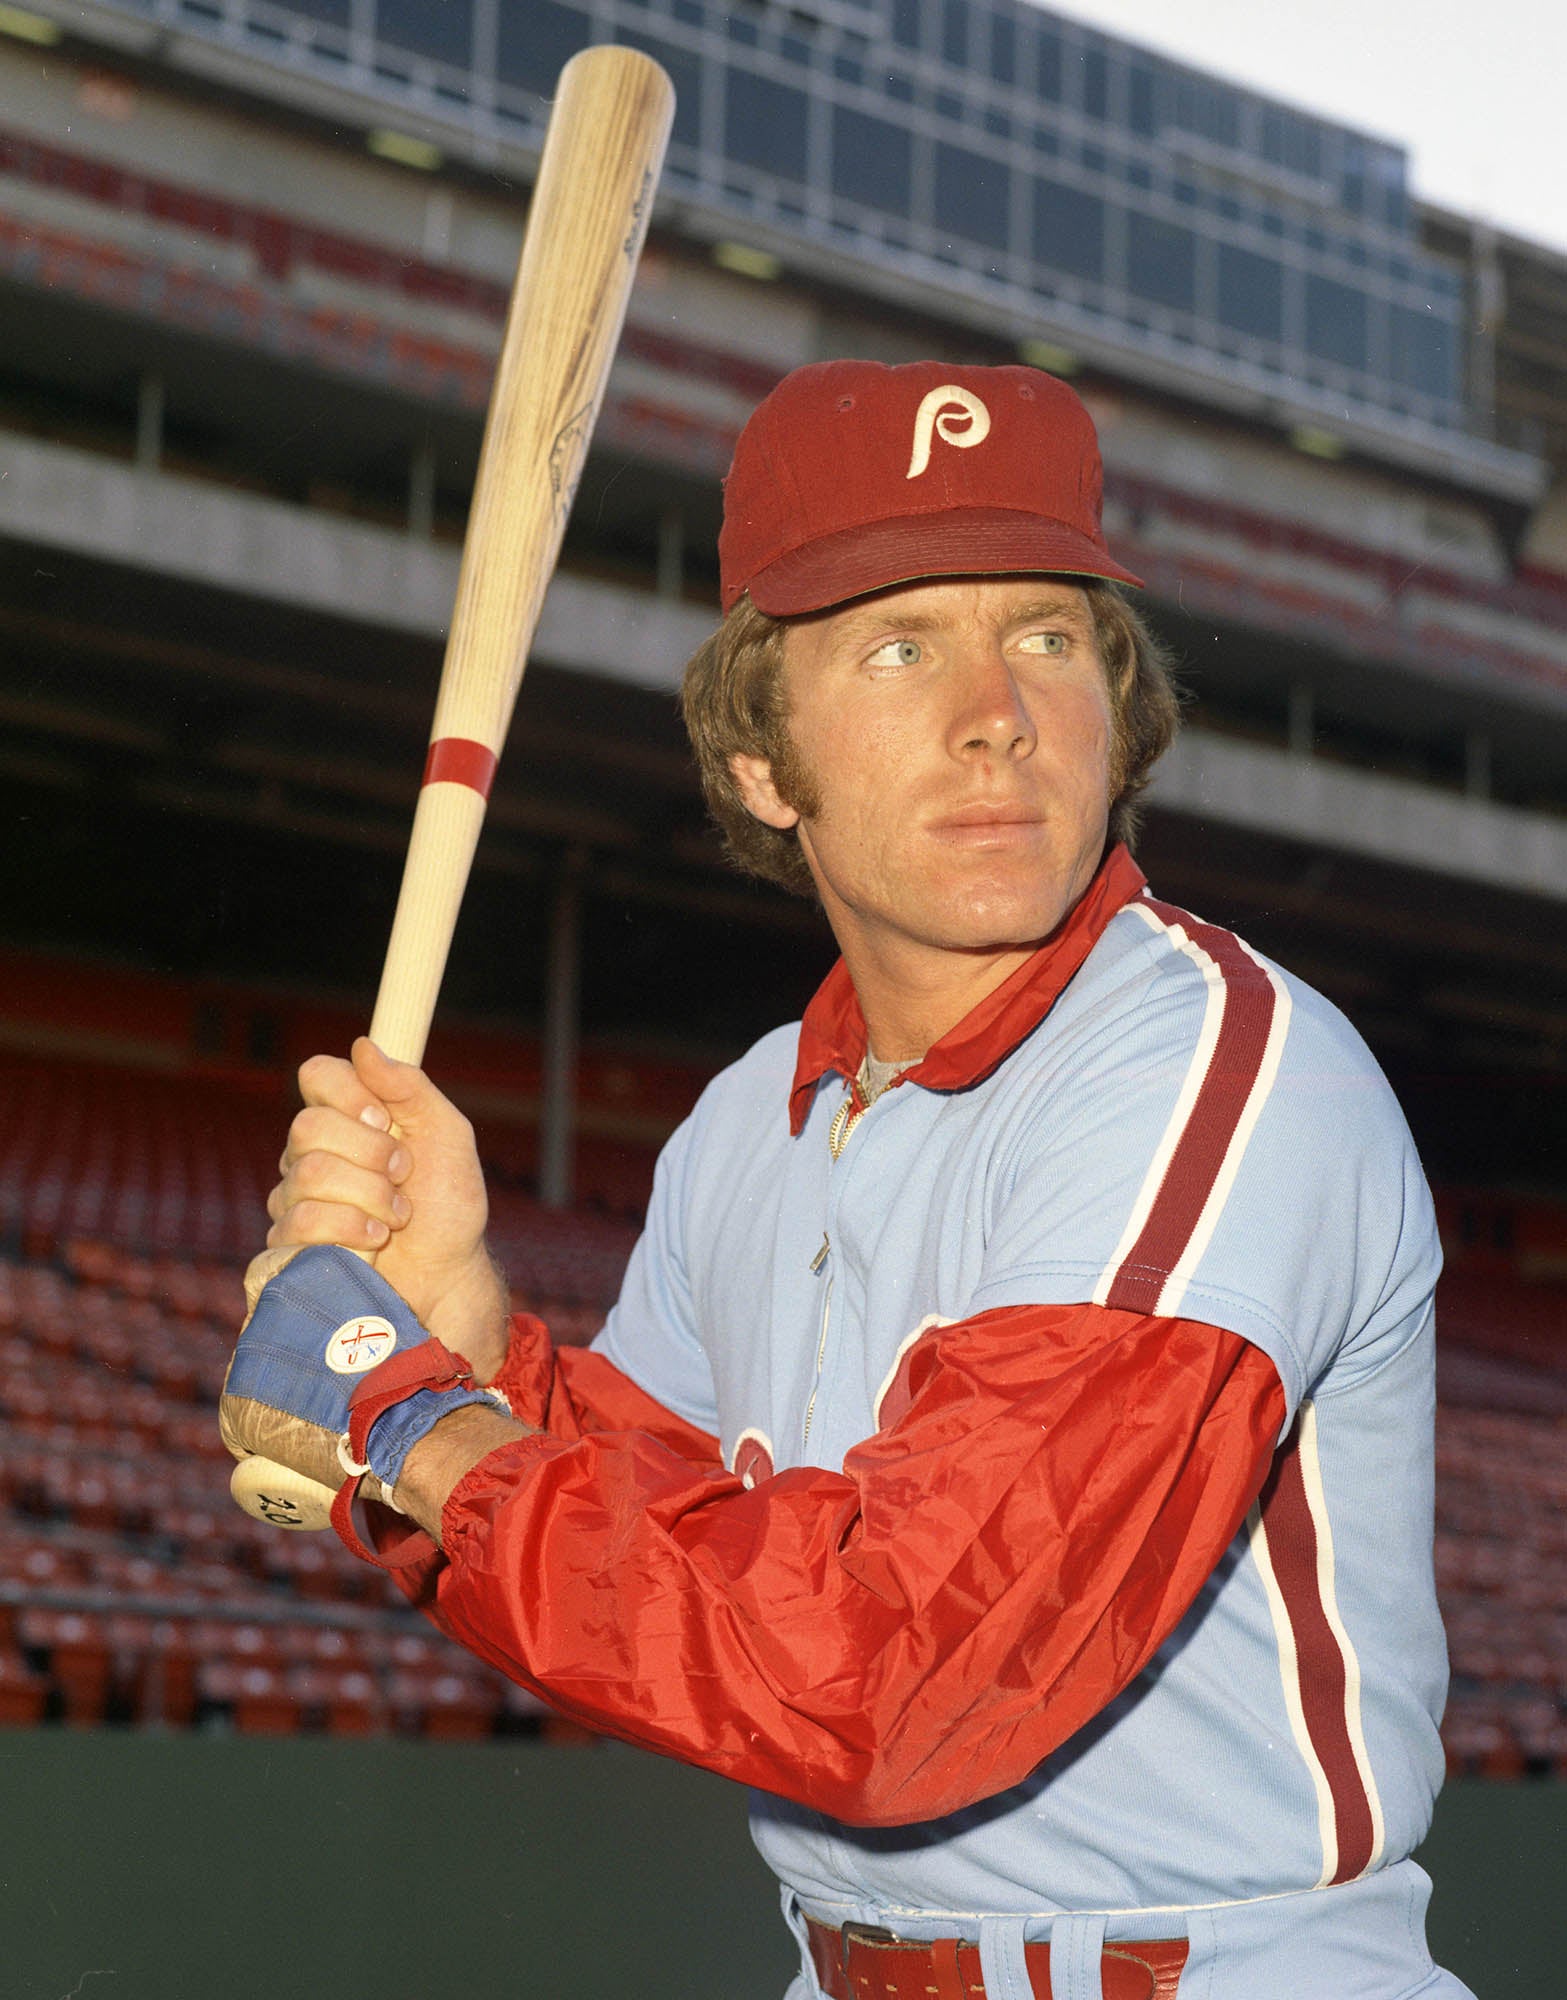 Philadelphia Phillies Mike Schmidt Sports Illustrated Cover by